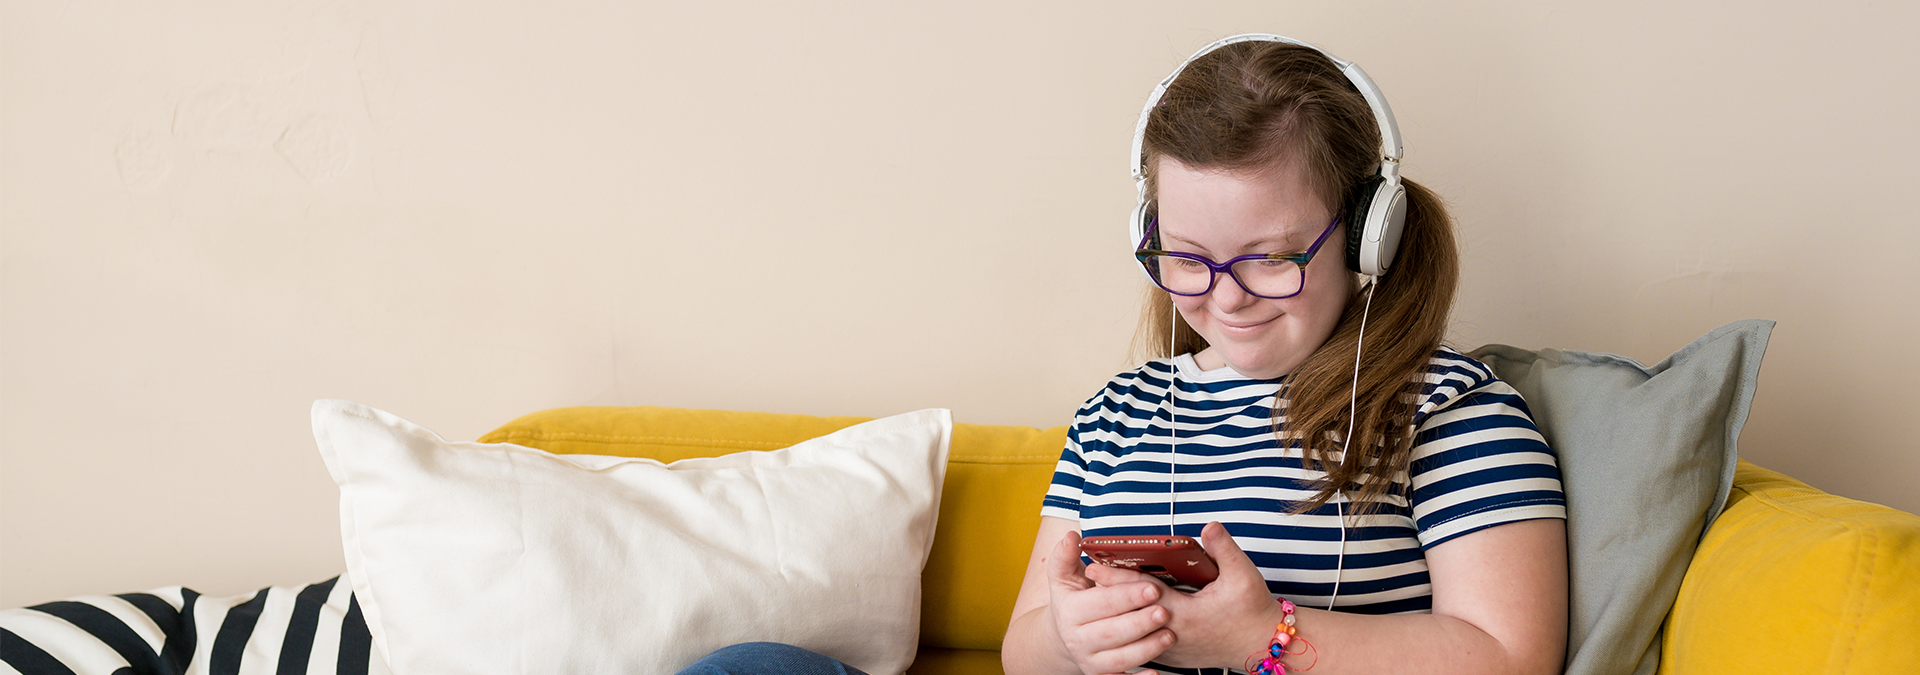 Young girl with Down Syndrome wearing headphones holding a phone